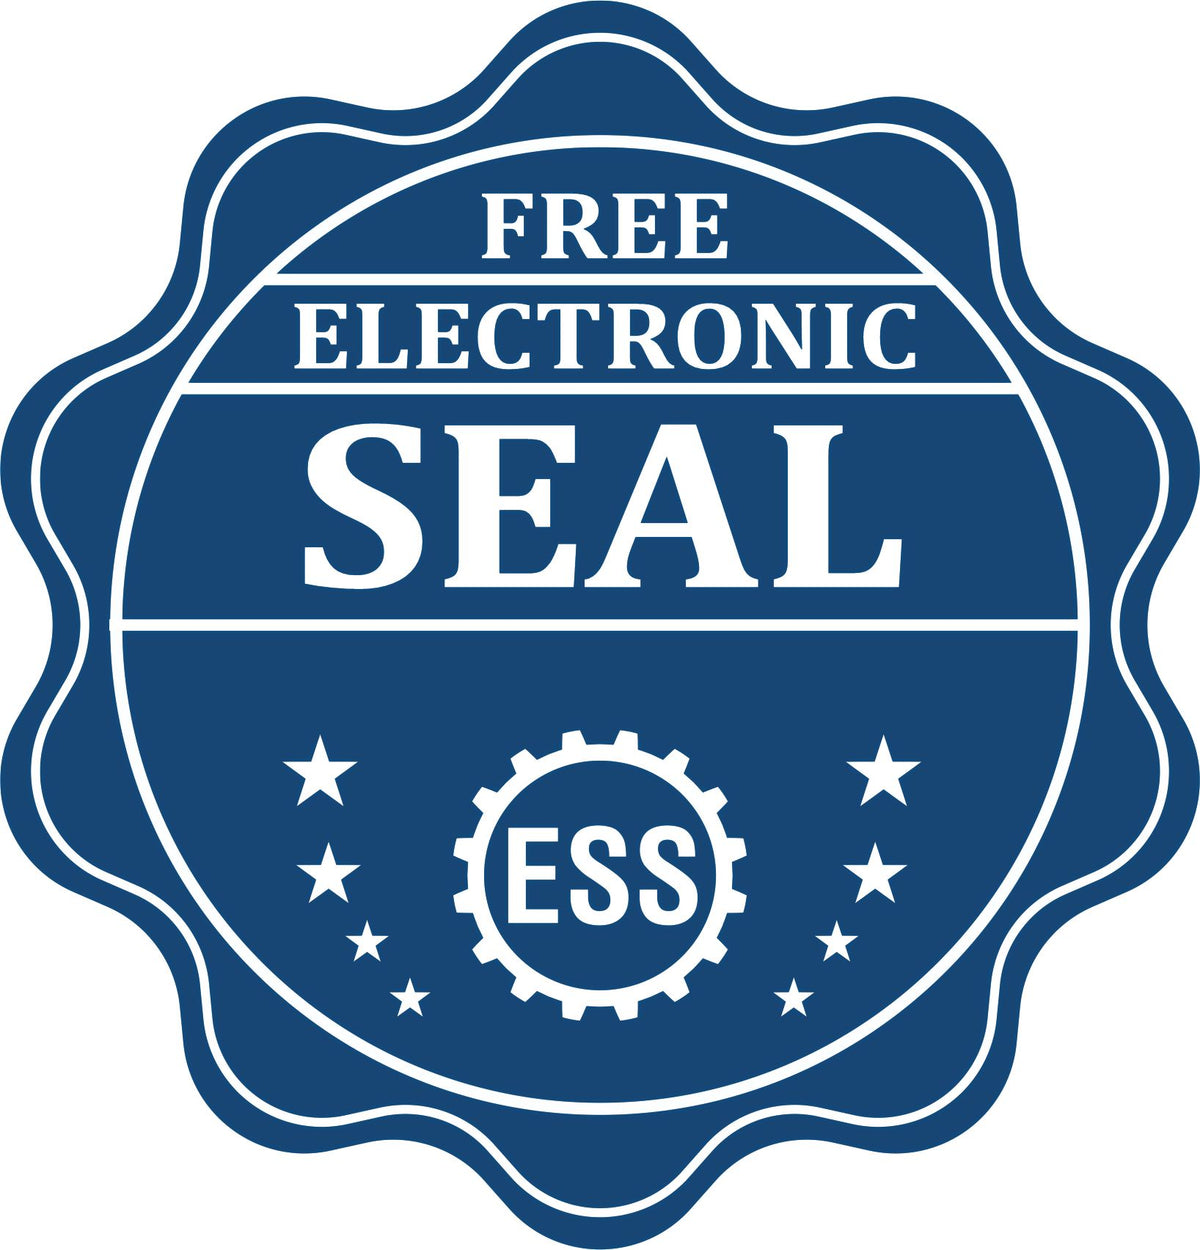 A badge showing a free electronic seal for the Long Reach Virginia Geology Seal with stars and the ESS gear on the emblem.